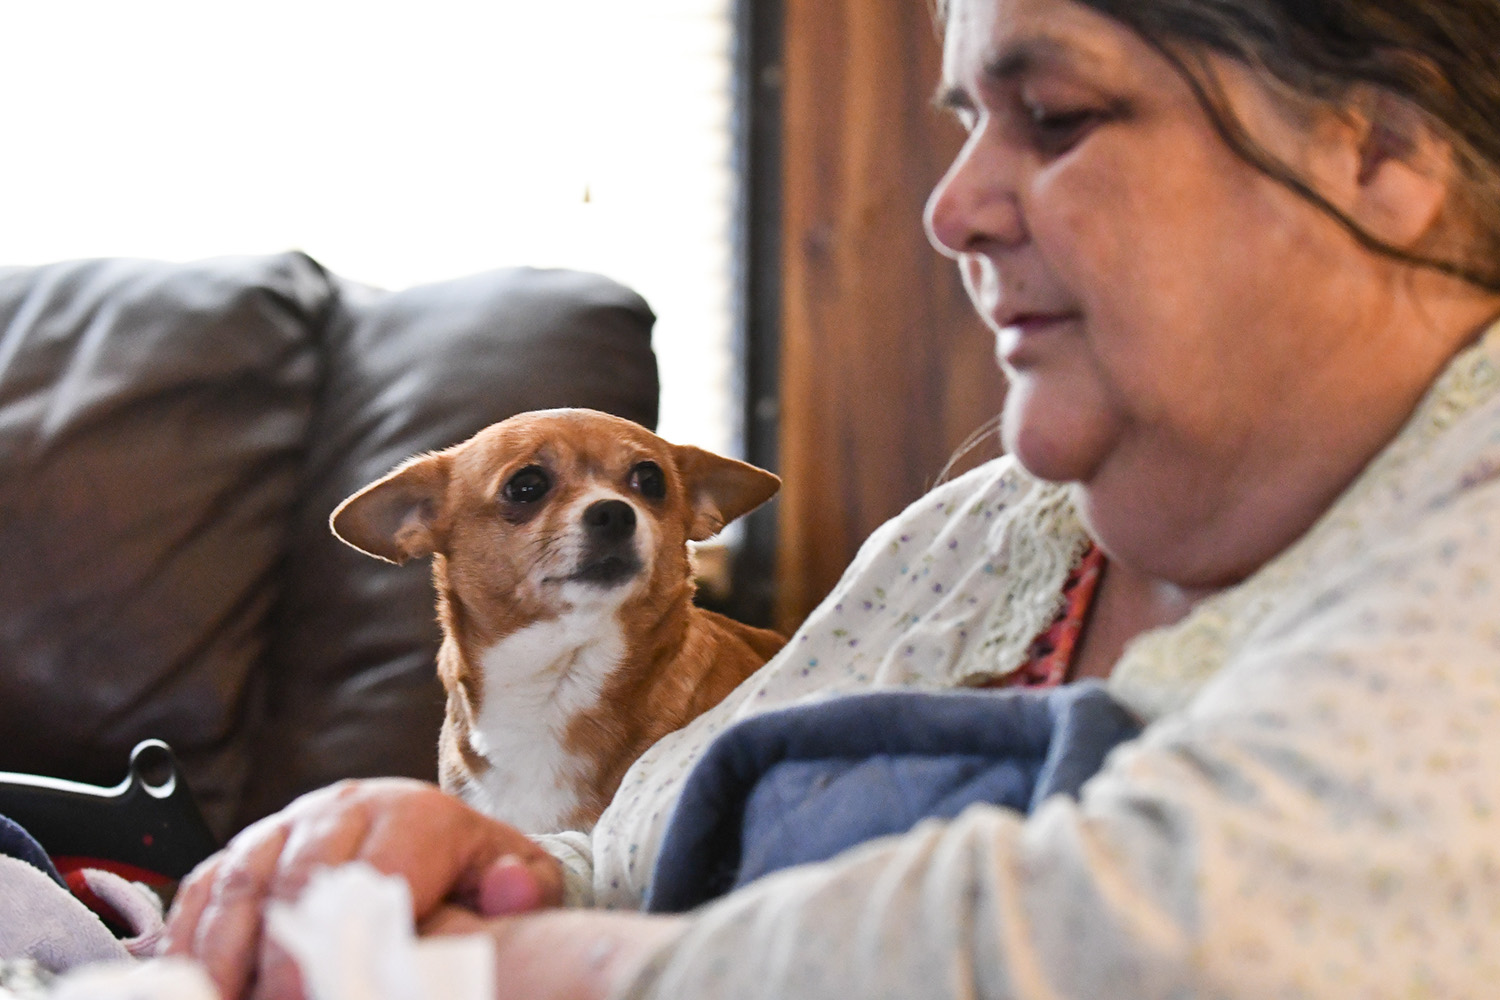 Snookie, a 7-year-old Chihuahua mix, drops her ears as she listens to her owner Terry Allen talk about the Feb. 2 fatal trailer fire, at the Airview Trailer Park, in Milan, Illinois, which killed three of their neighbors: Delores R. Martin, 71, Brittany Danielle Mote, 31, and Thomas J. Conley, 9. (Todd Mizener - Dispatch/Argus) 